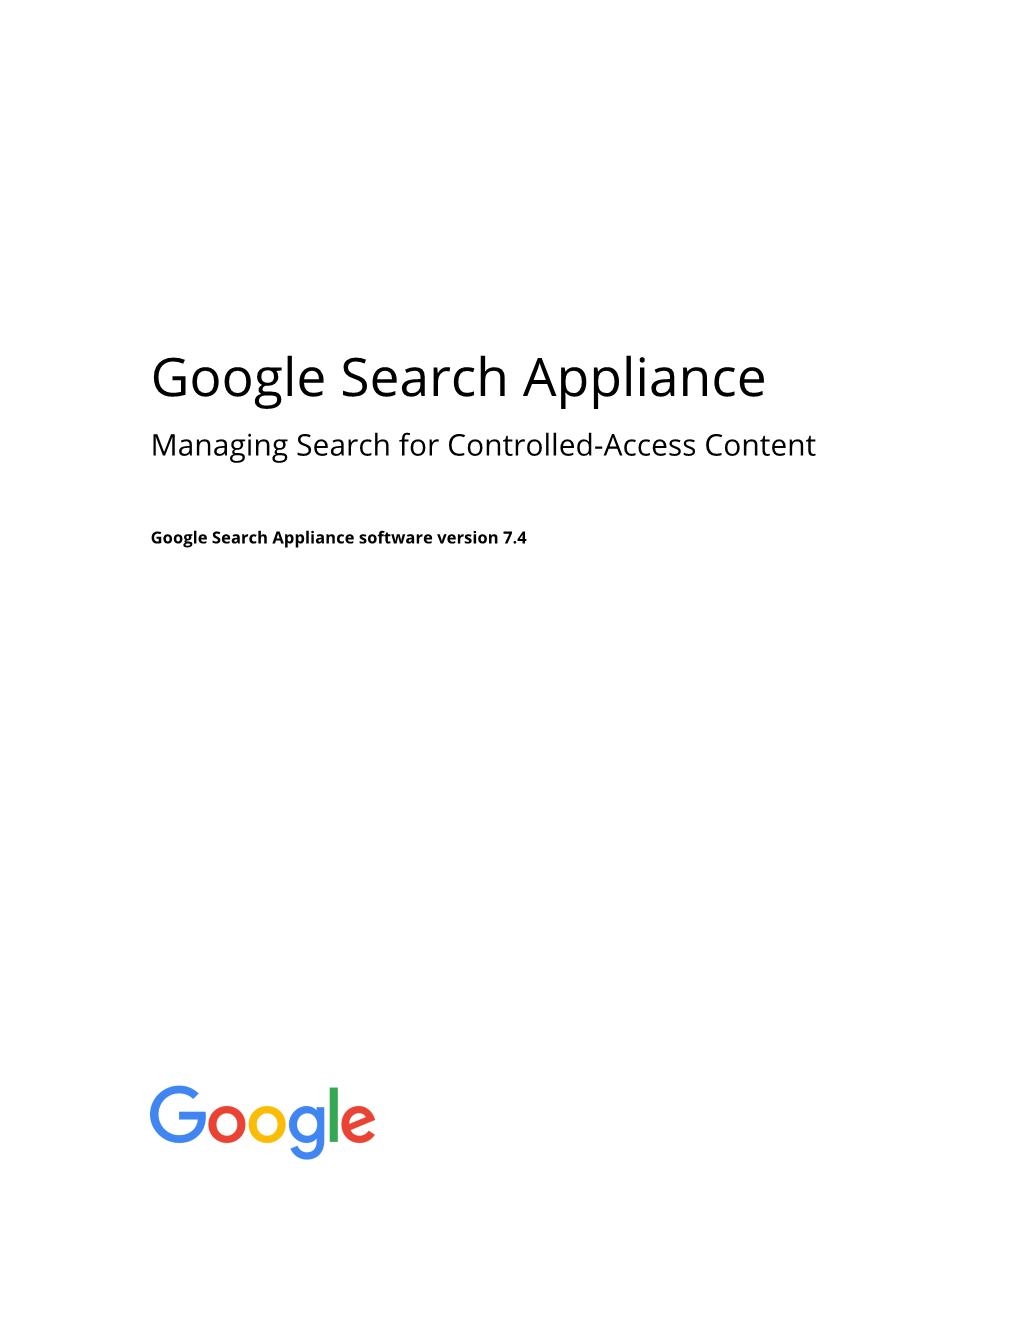 Managing Search for Controlled-Access Content